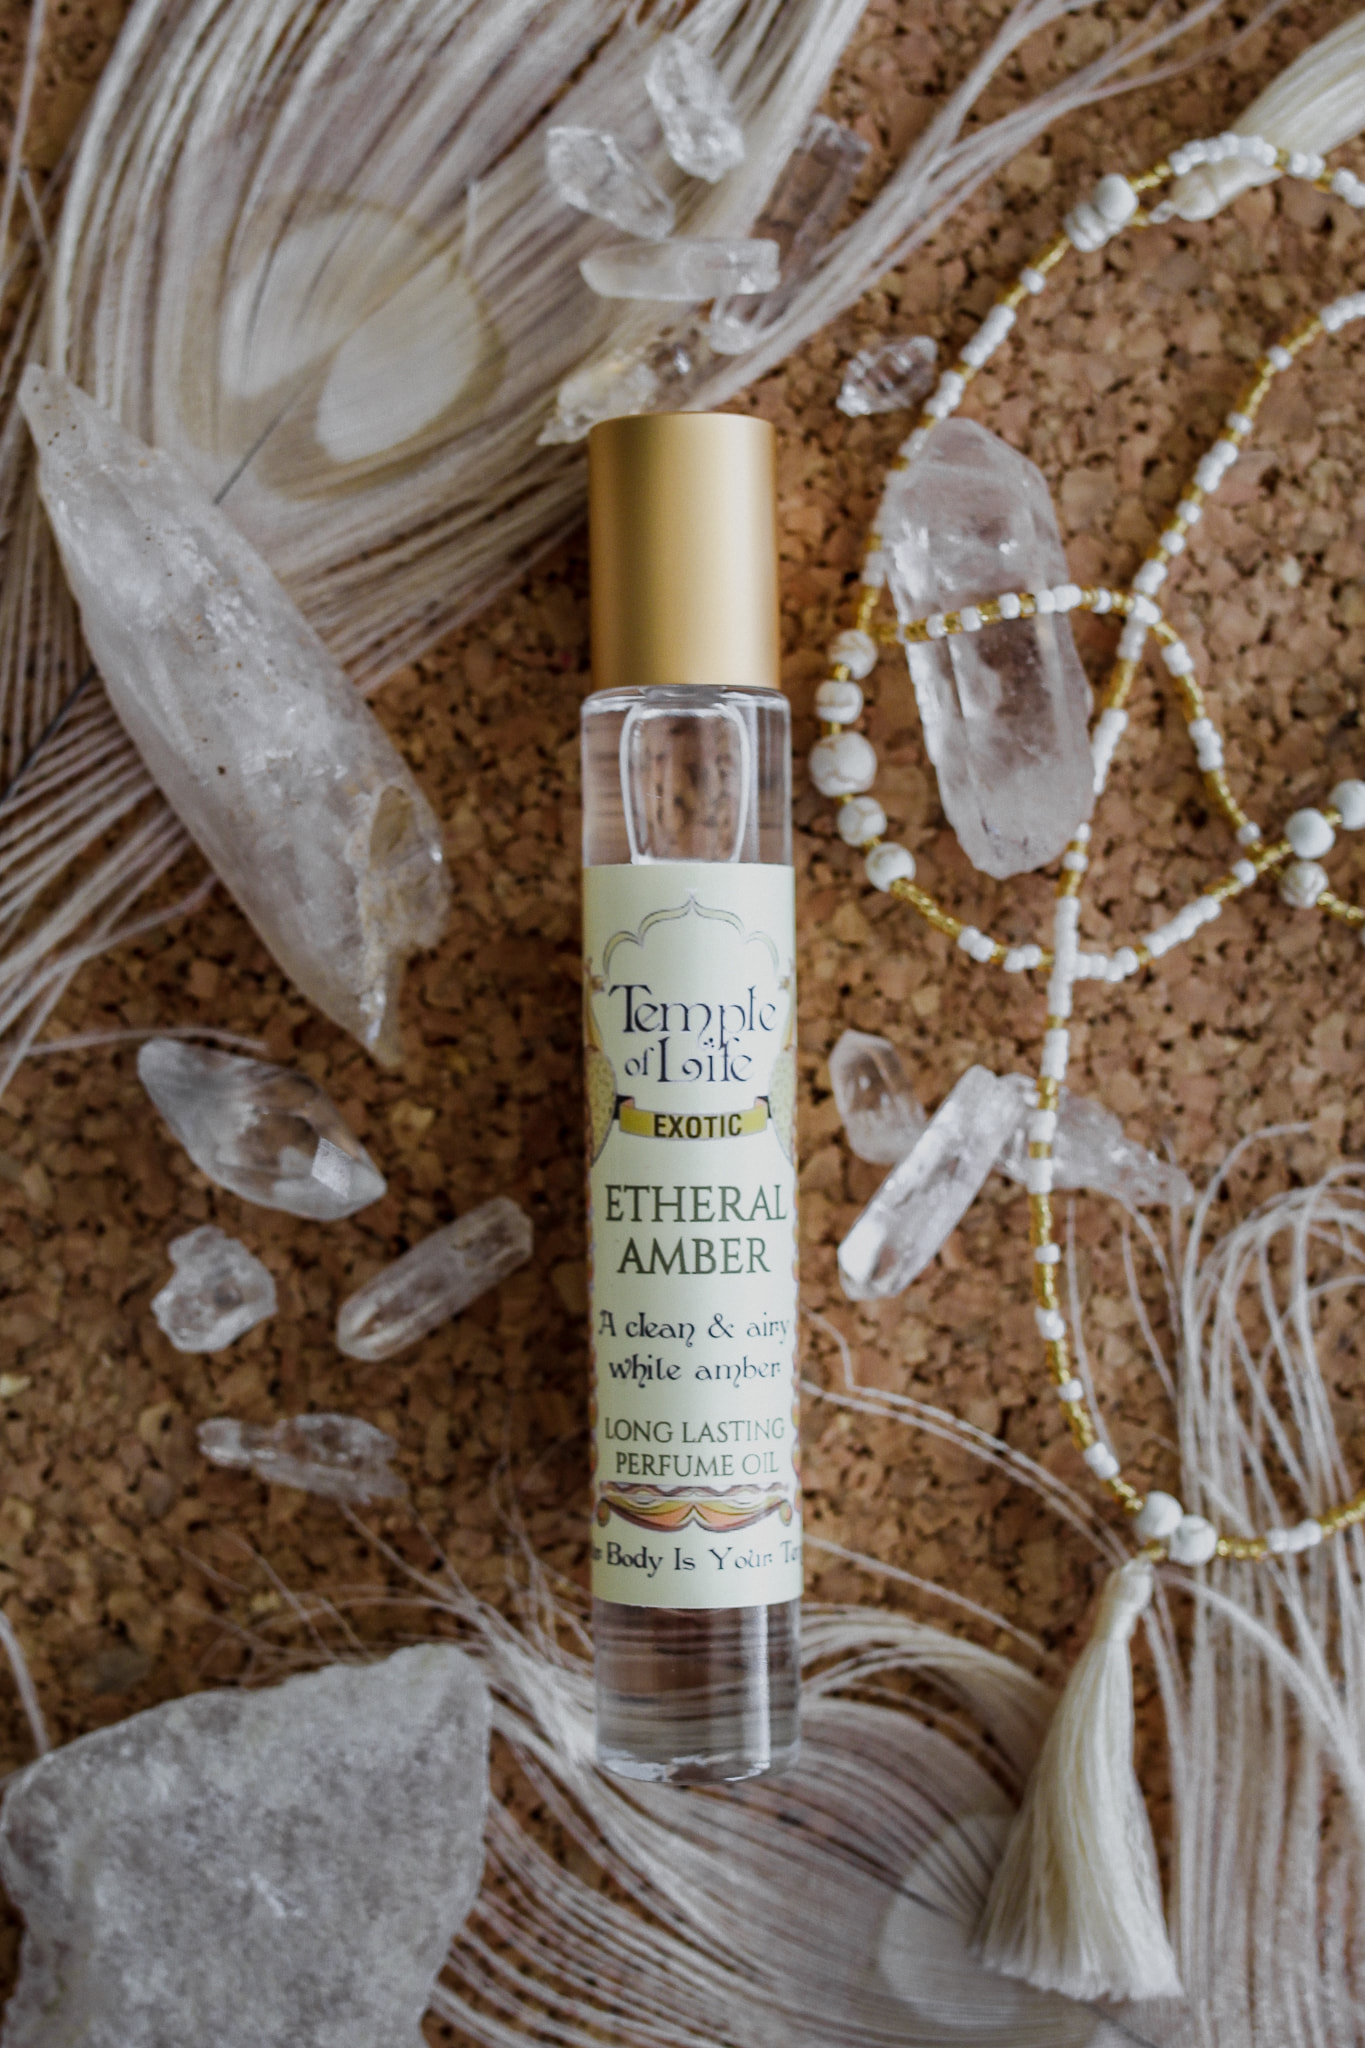 Delicate white amber oil  Etheral Amber by Temple of Life